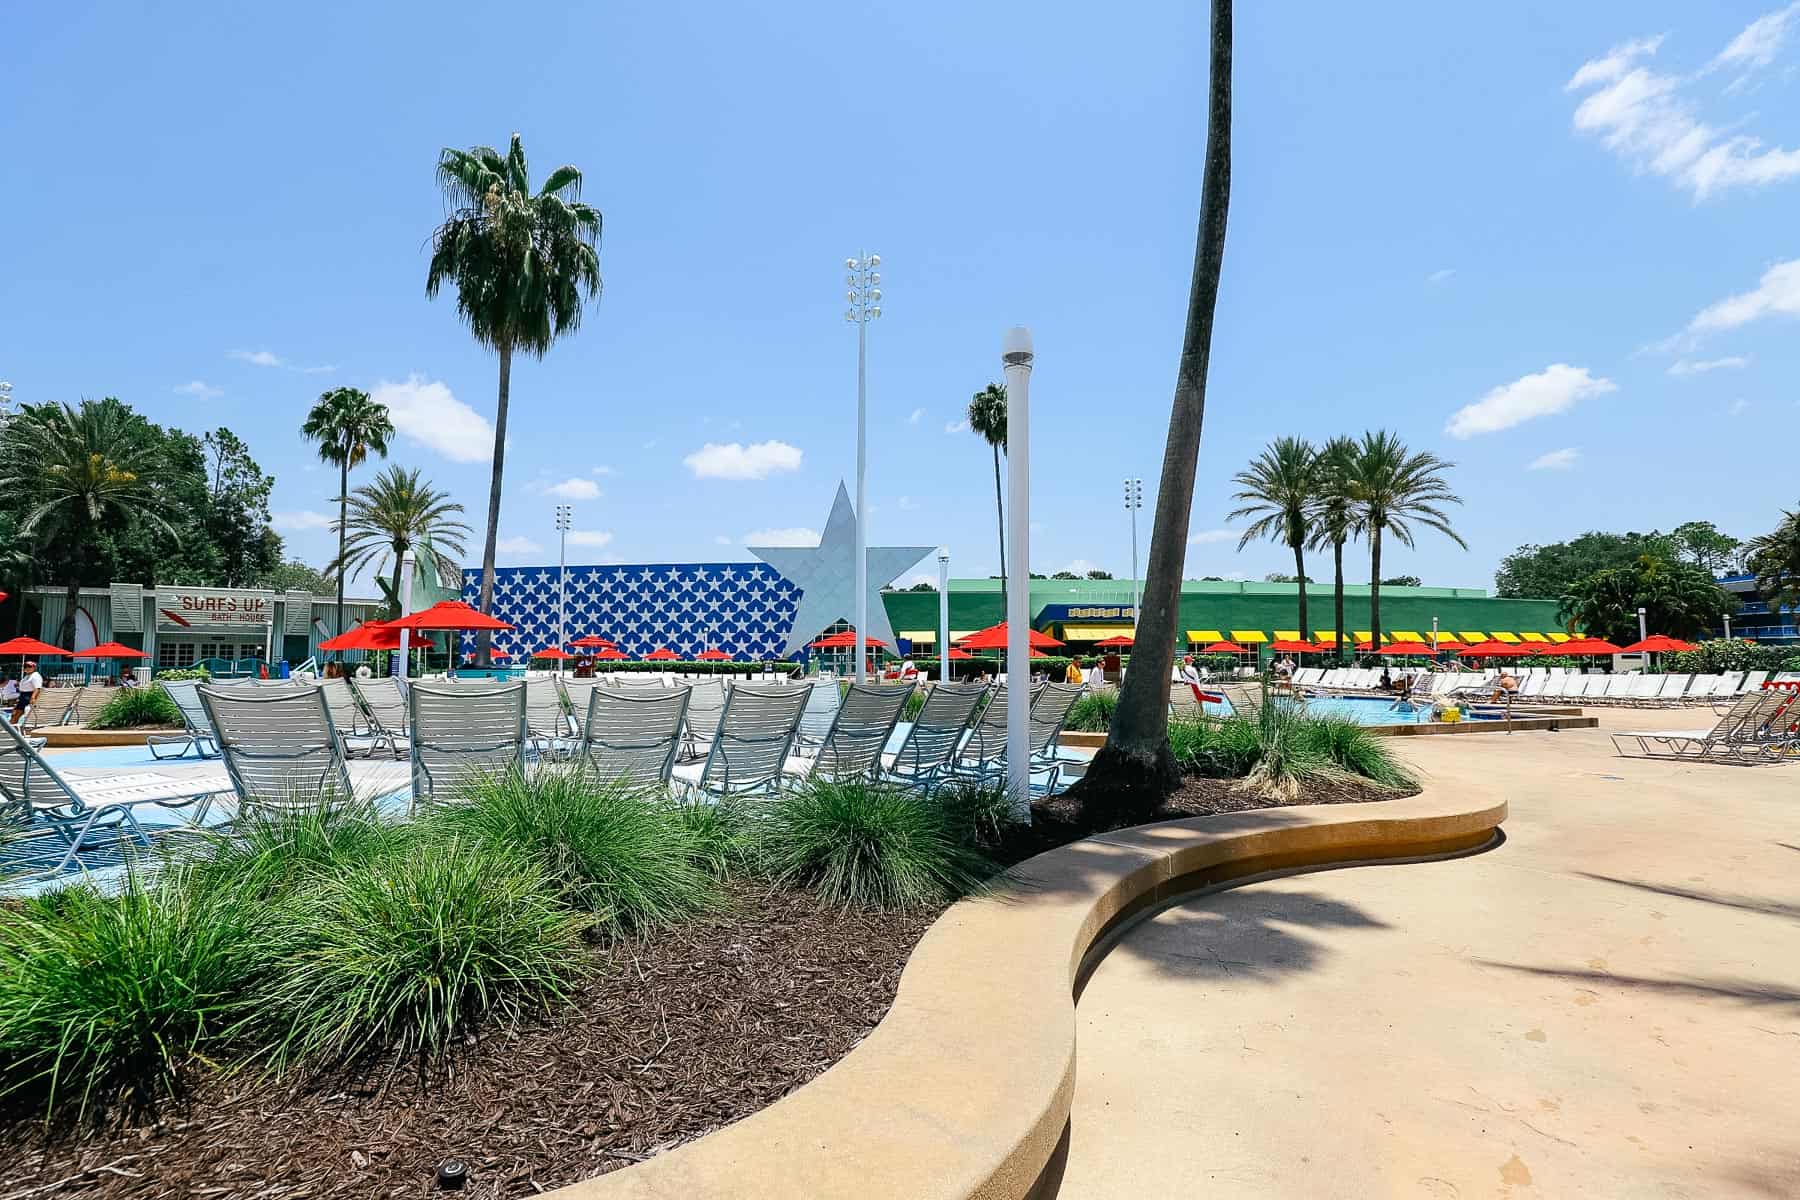 Curbing and other landscaping around the pool at All-Star Sports. 